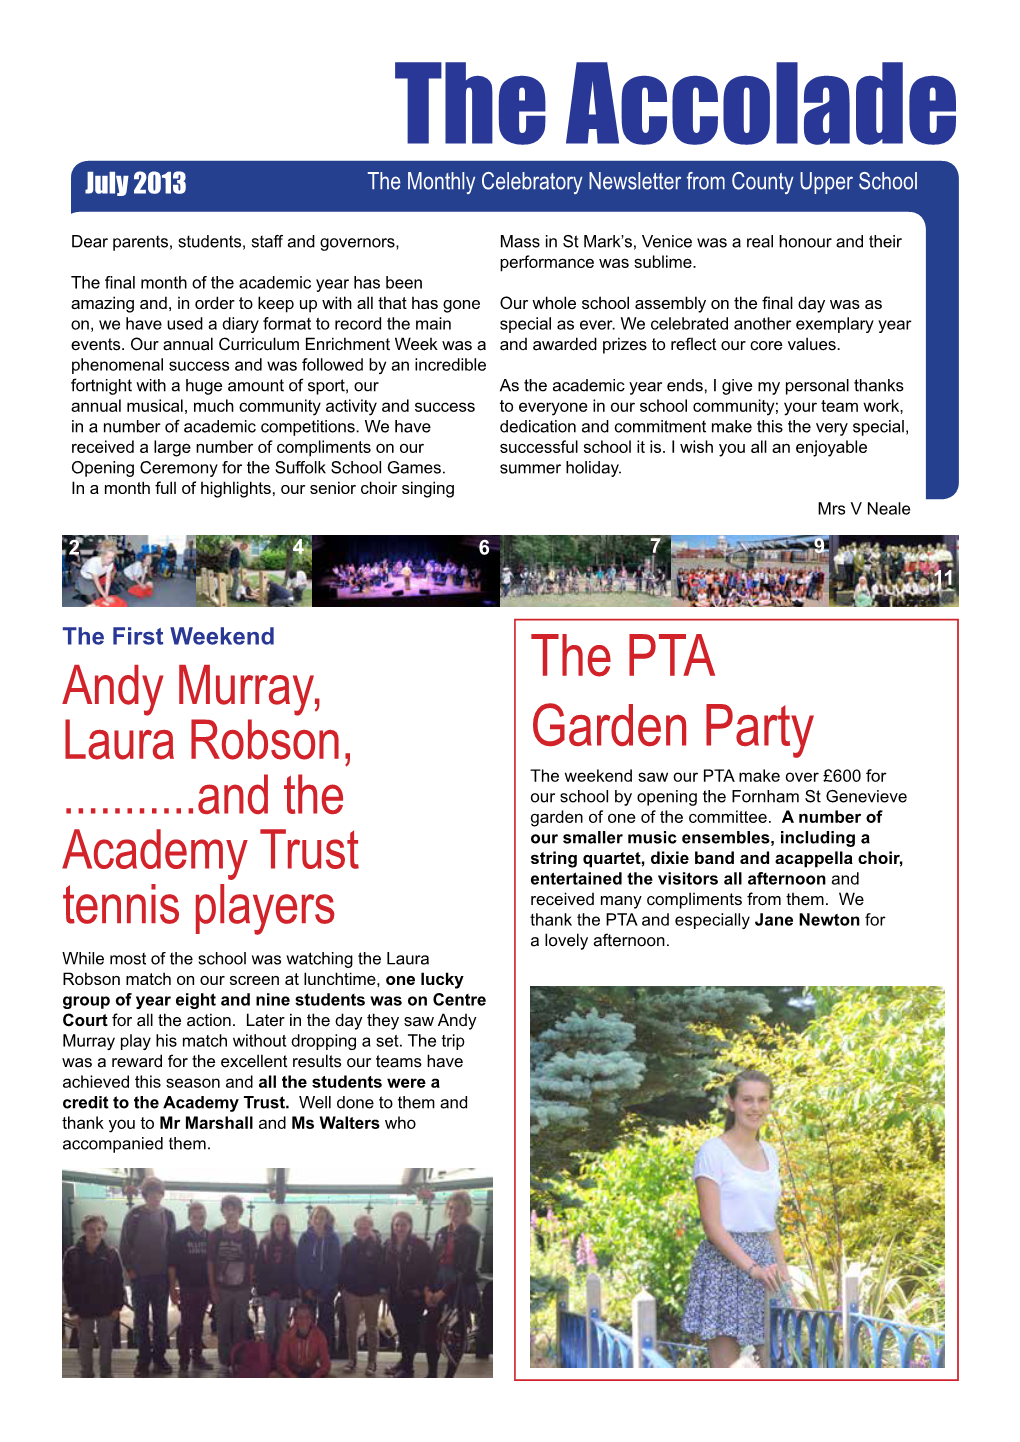 The Accolade July 2013 the Monthly Celebratory Newsletter from County Upper School